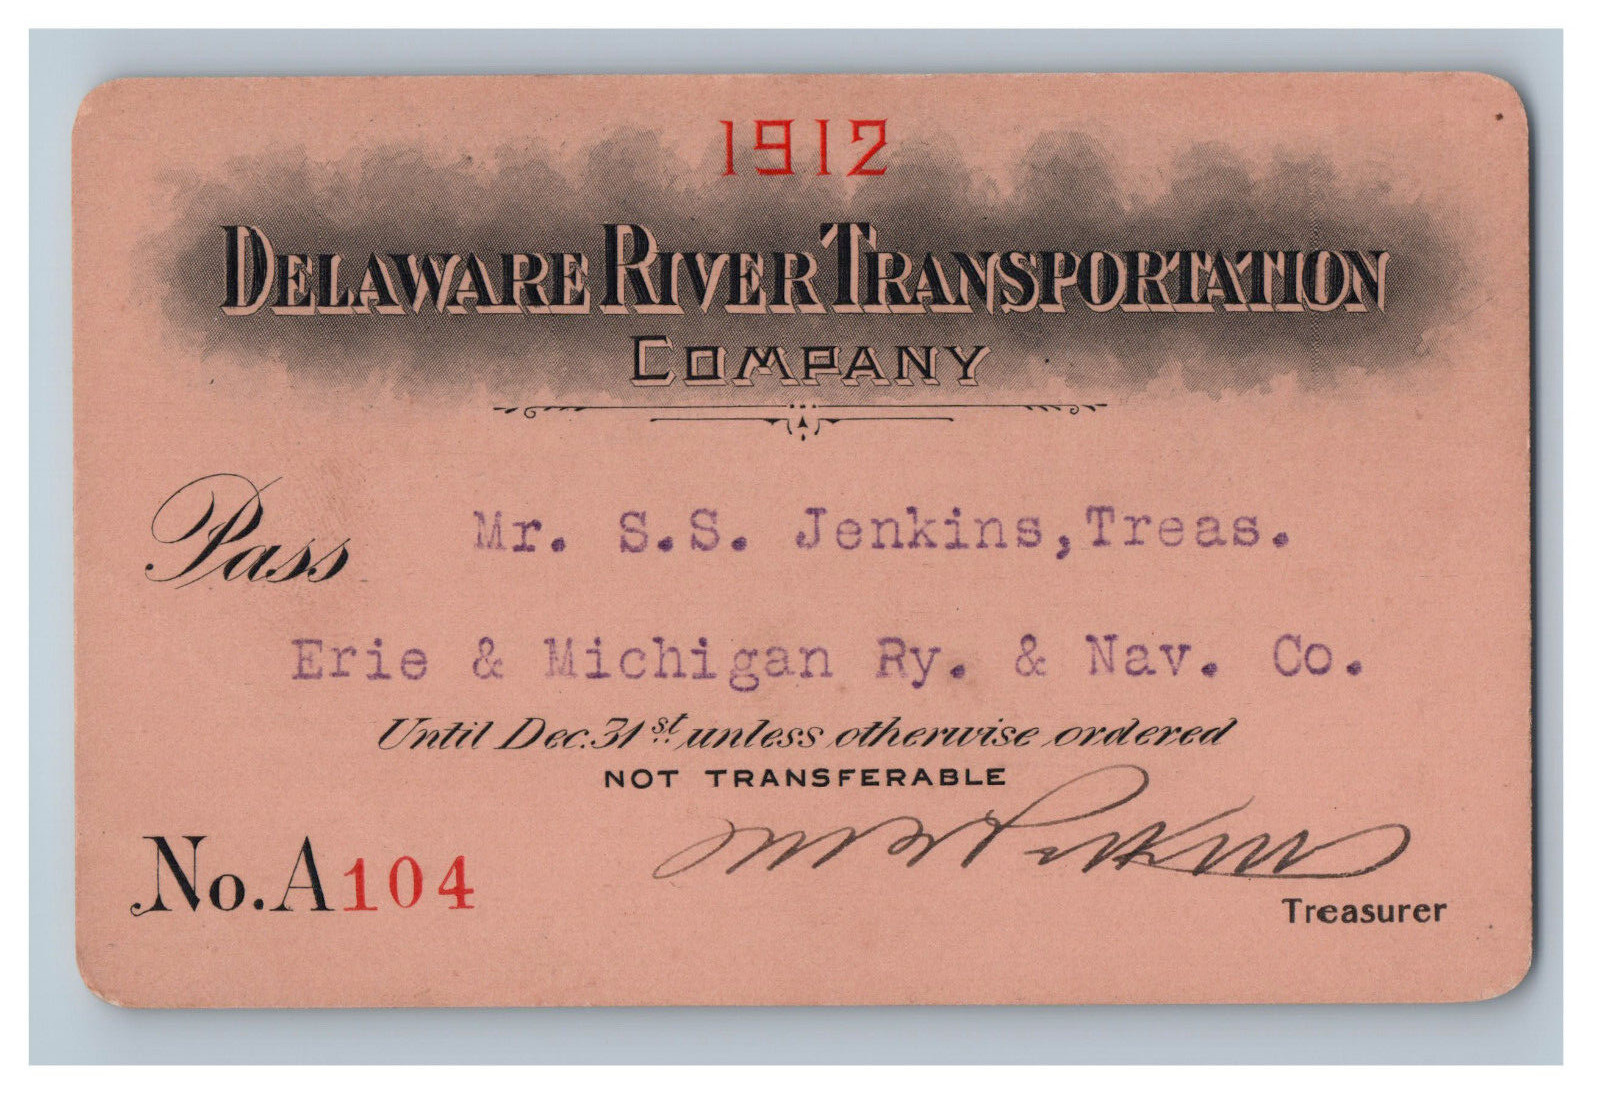 1912 Delaware River Transportation Co. Railroad Employee Pass Low Number A104